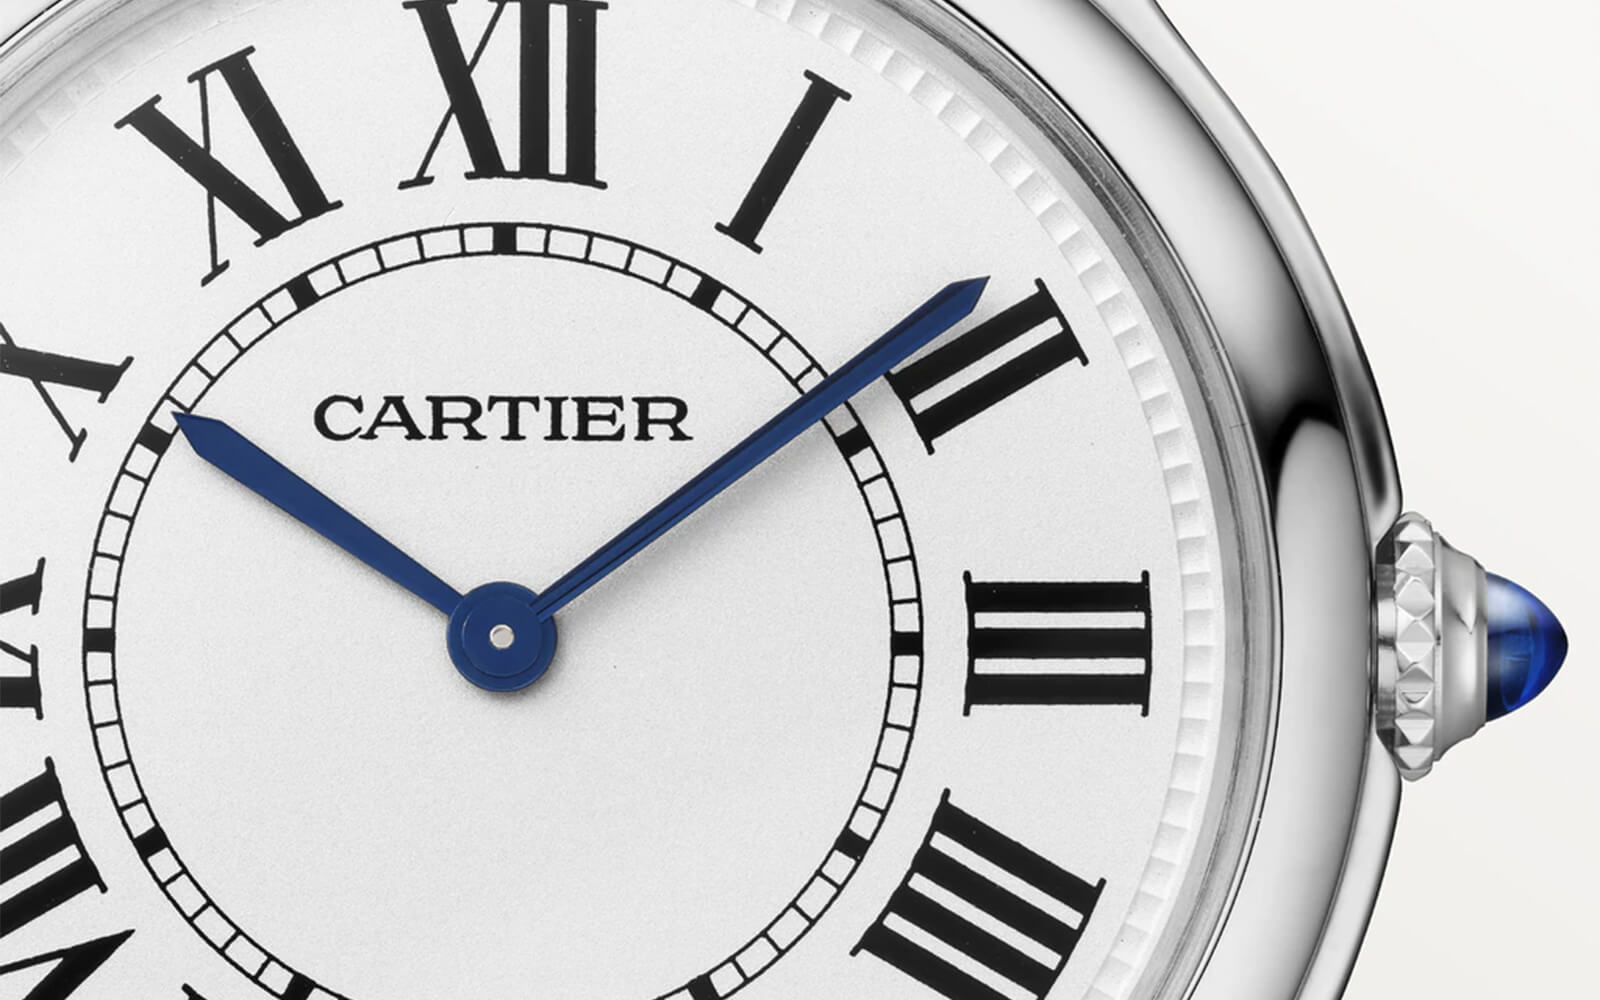 Shop Cartier now in Melbourne, Melbourne Airport, Perth, Canberra, Sydney, Sydney Barangaroo and Online.